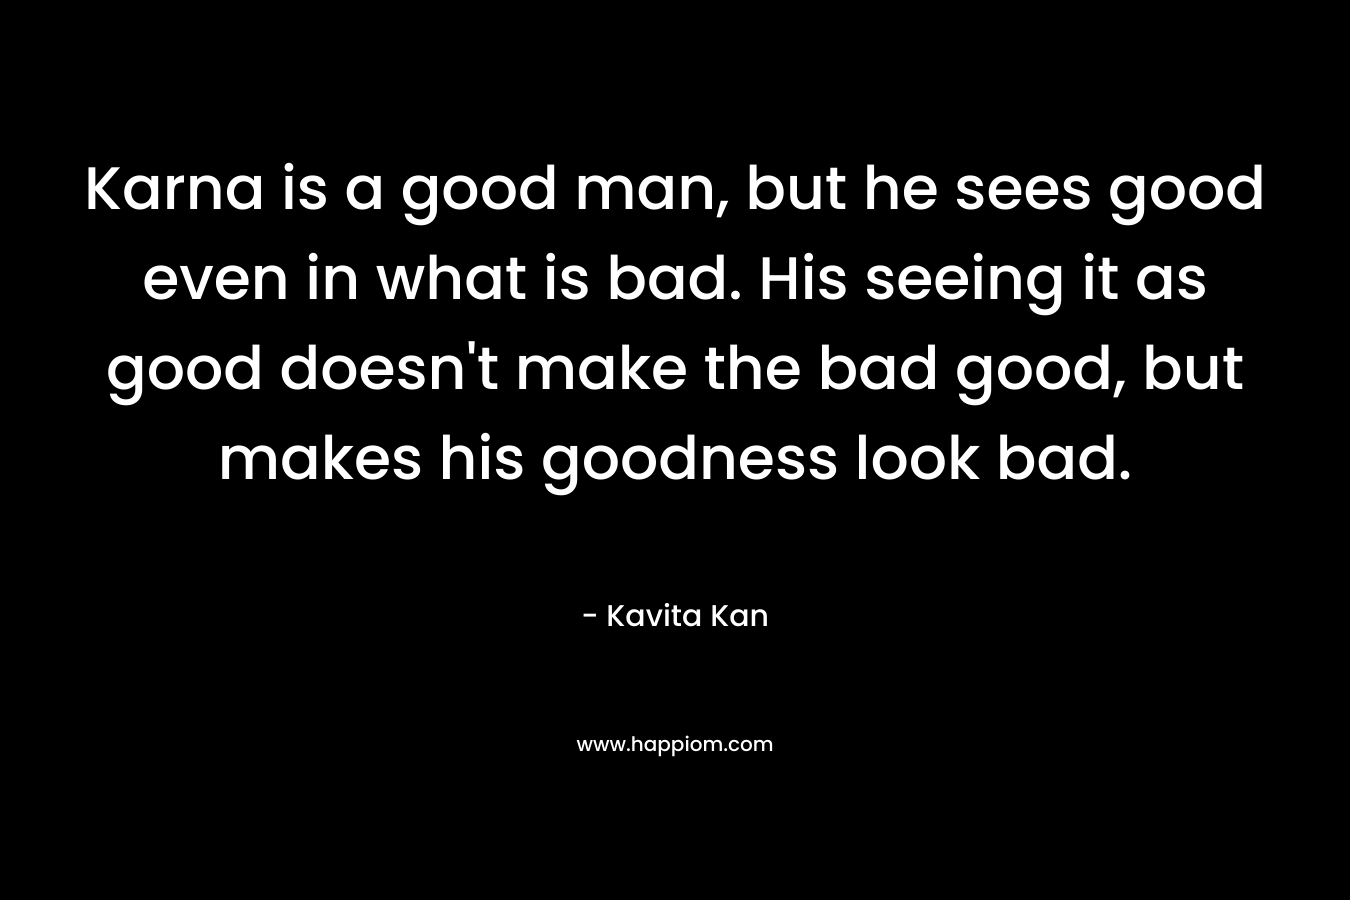 Karna is a good man, but he sees good even in what is bad. His seeing it as good doesn't make the bad good, but makes his goodness look bad.